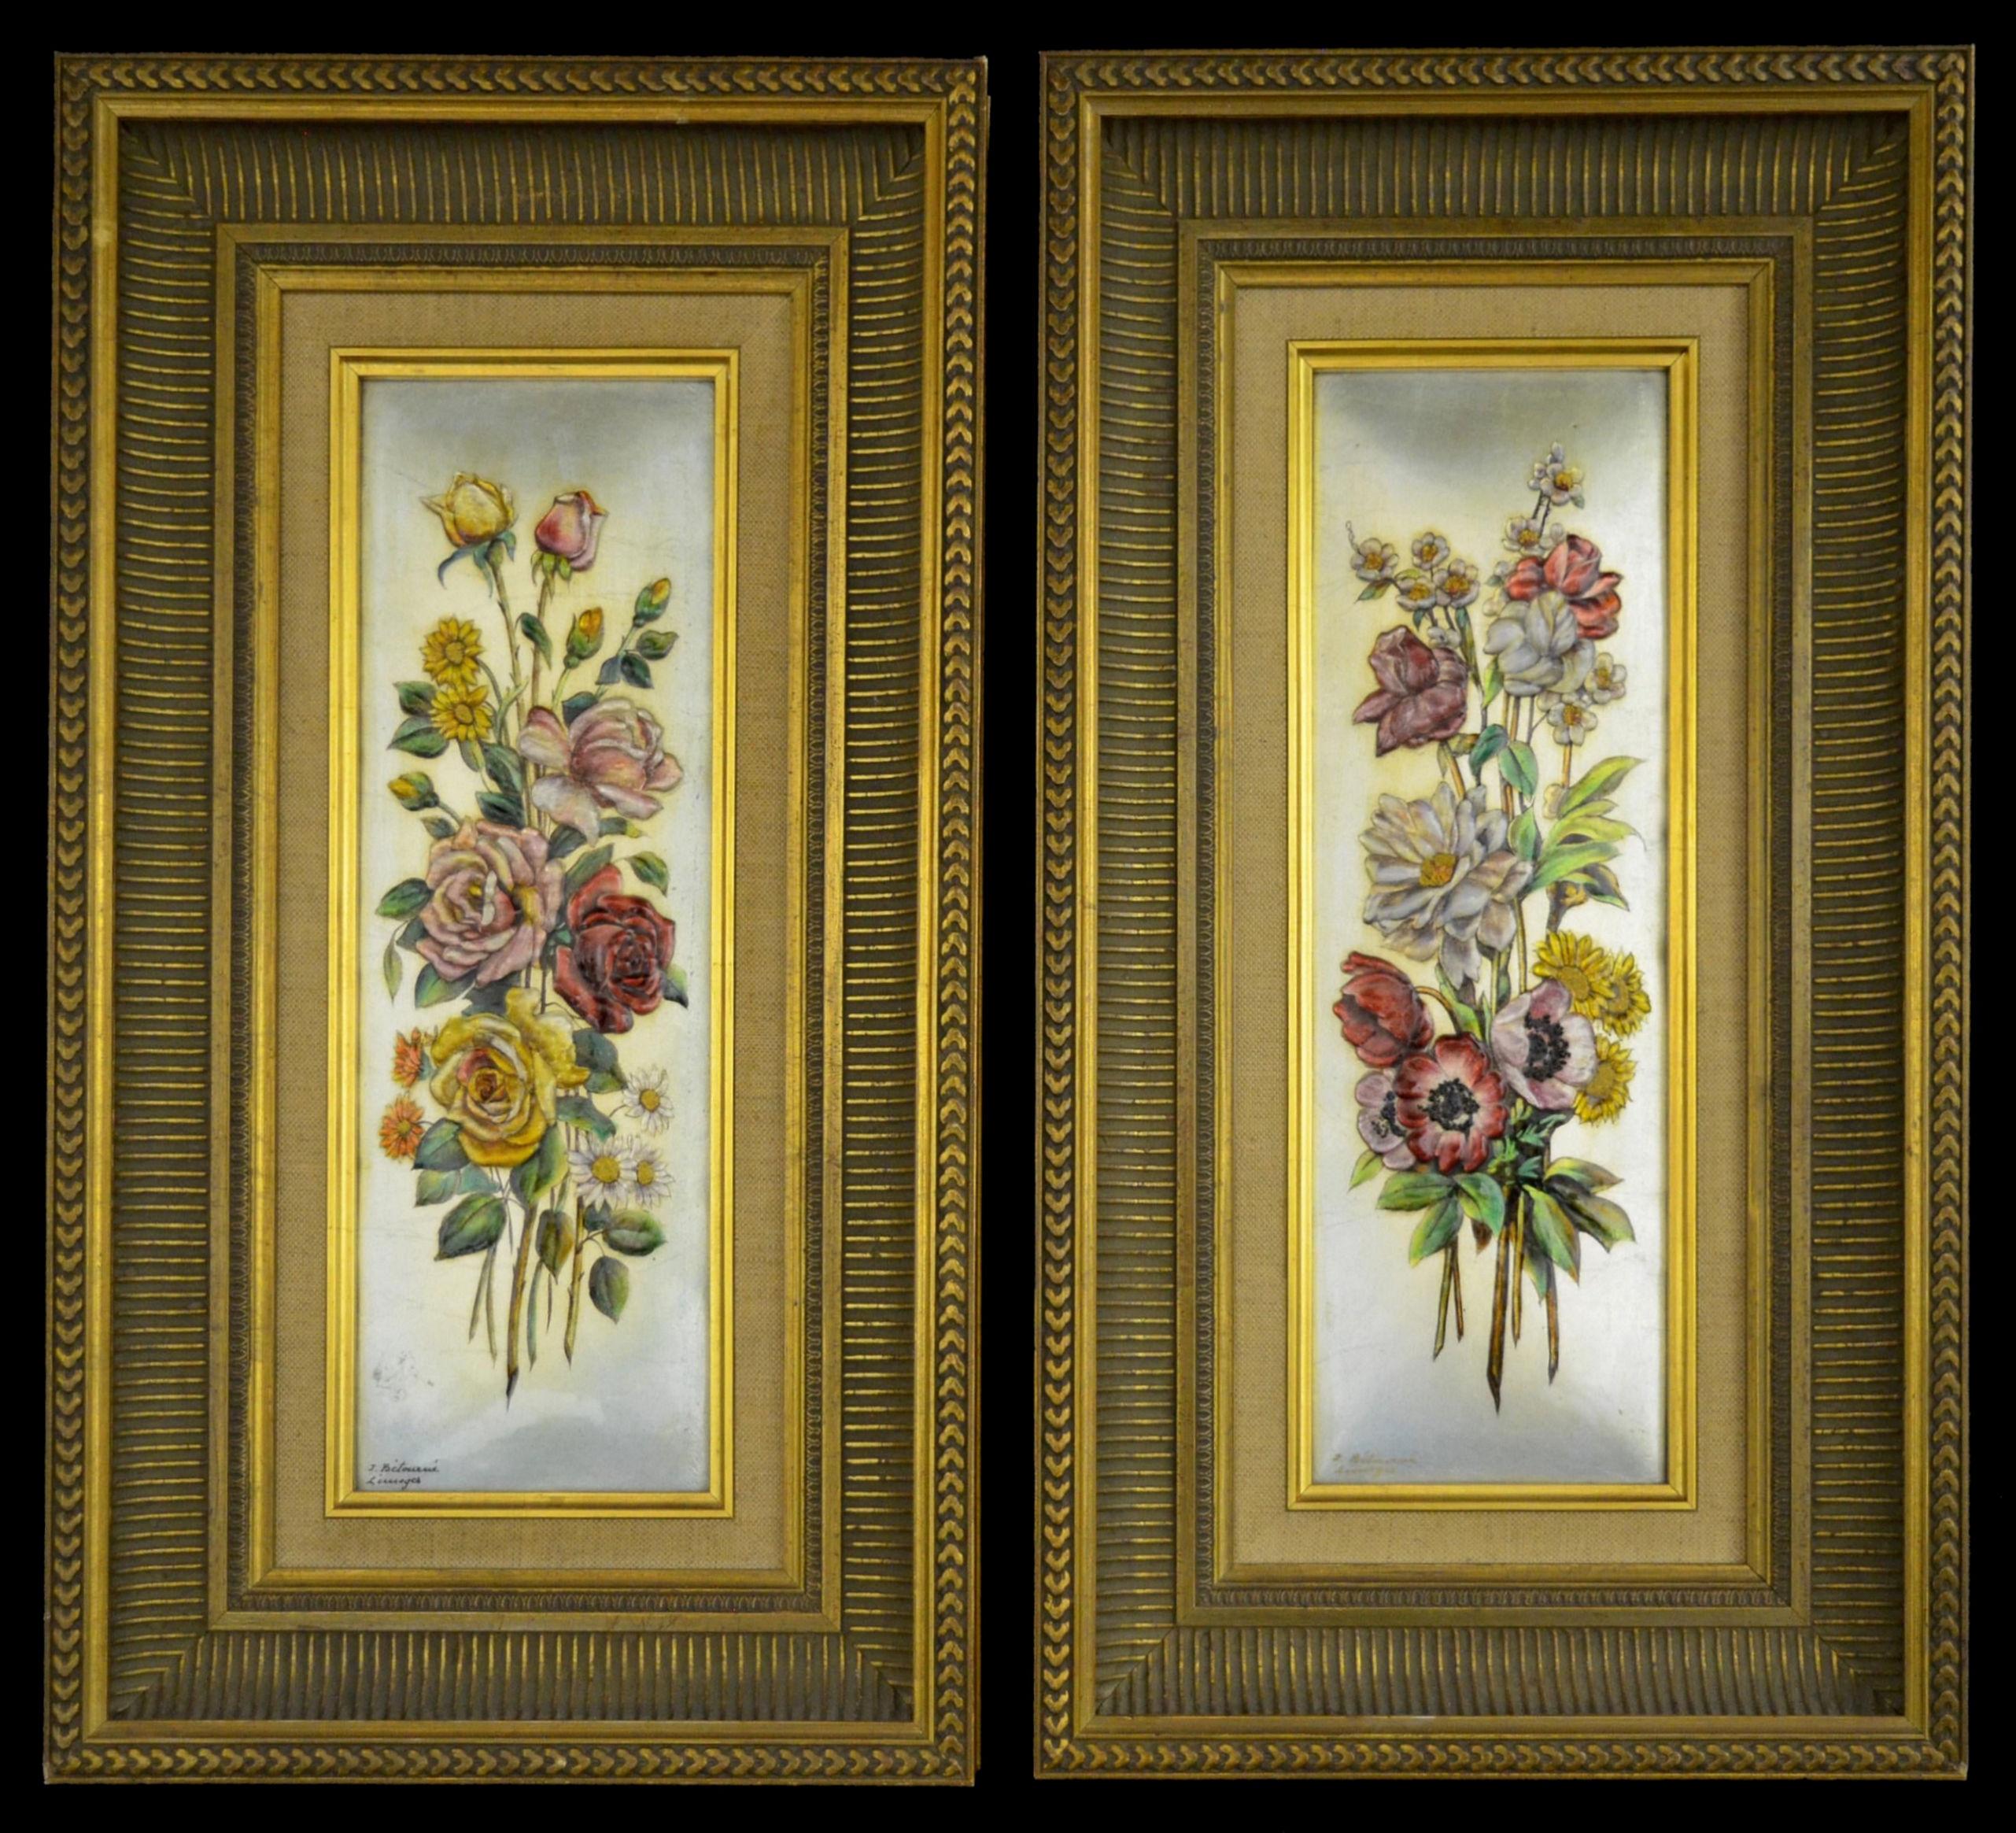 Pair framed enamel plaques by the Maitre Emailleur, Jean Betourne of Limoges, France. Each signed. Plaques measure approximately 5 by 13 inches and frames measure 10 by 18 inches.